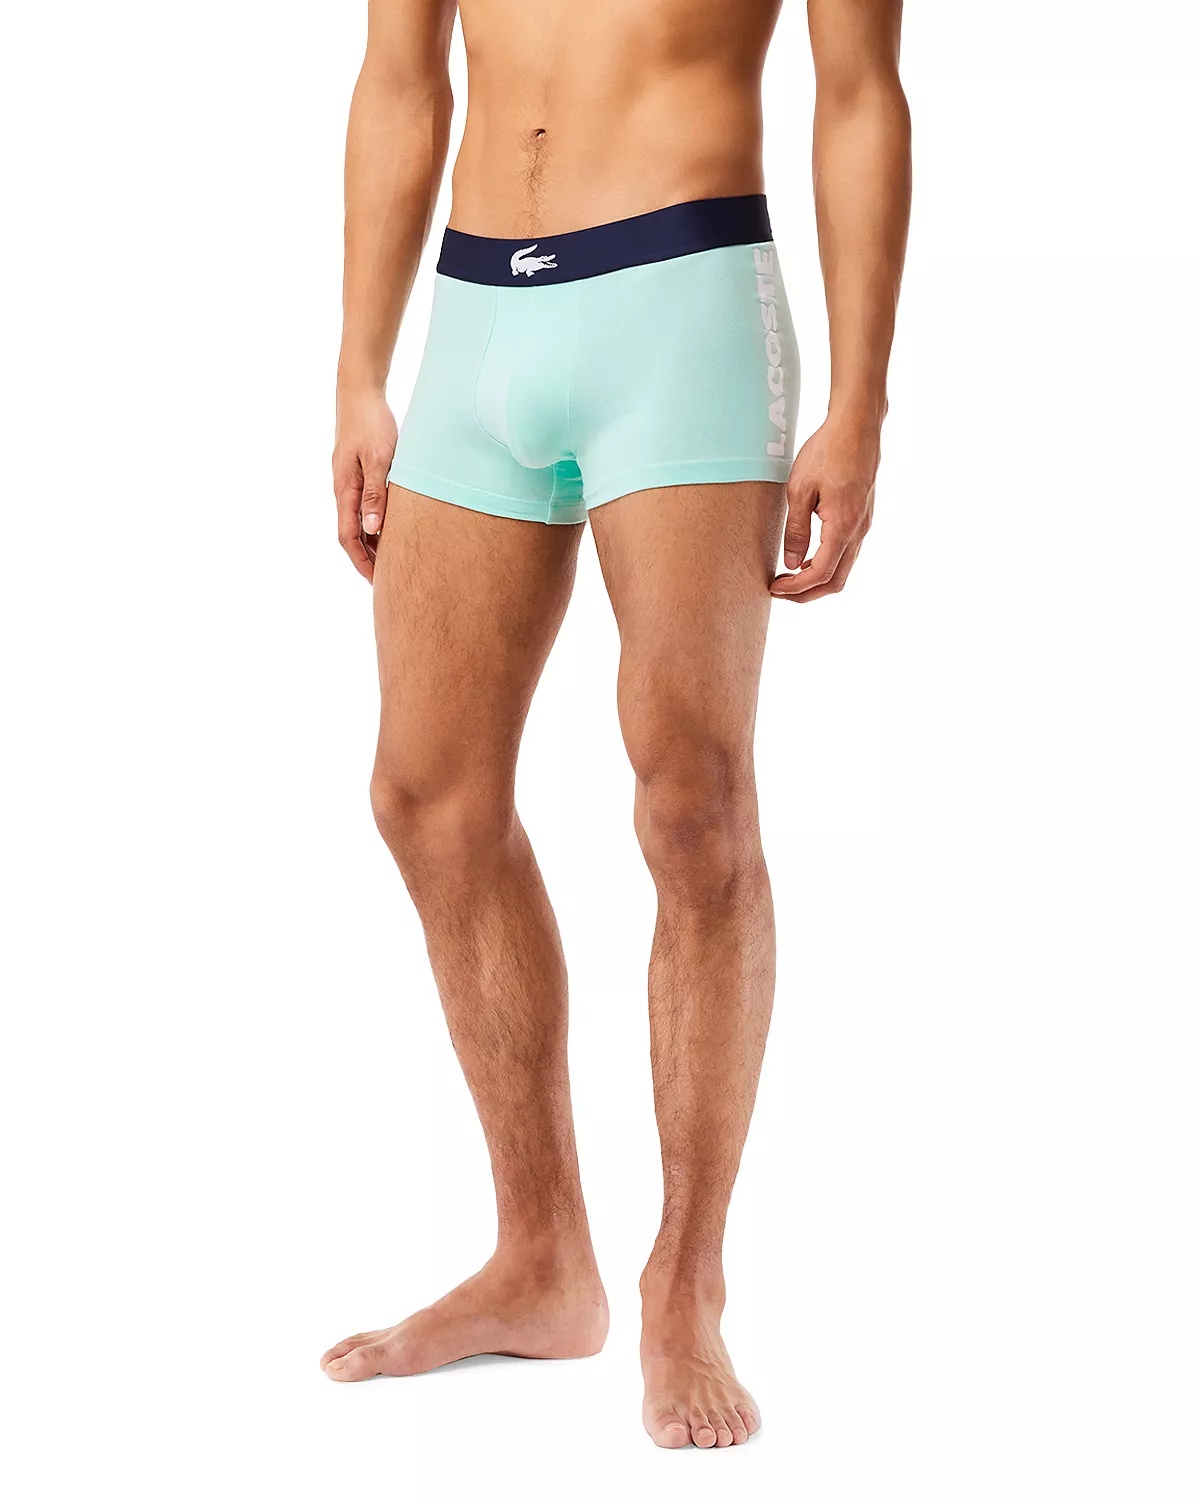 Cotton Stretch Trunks, Pack of 3 - 6